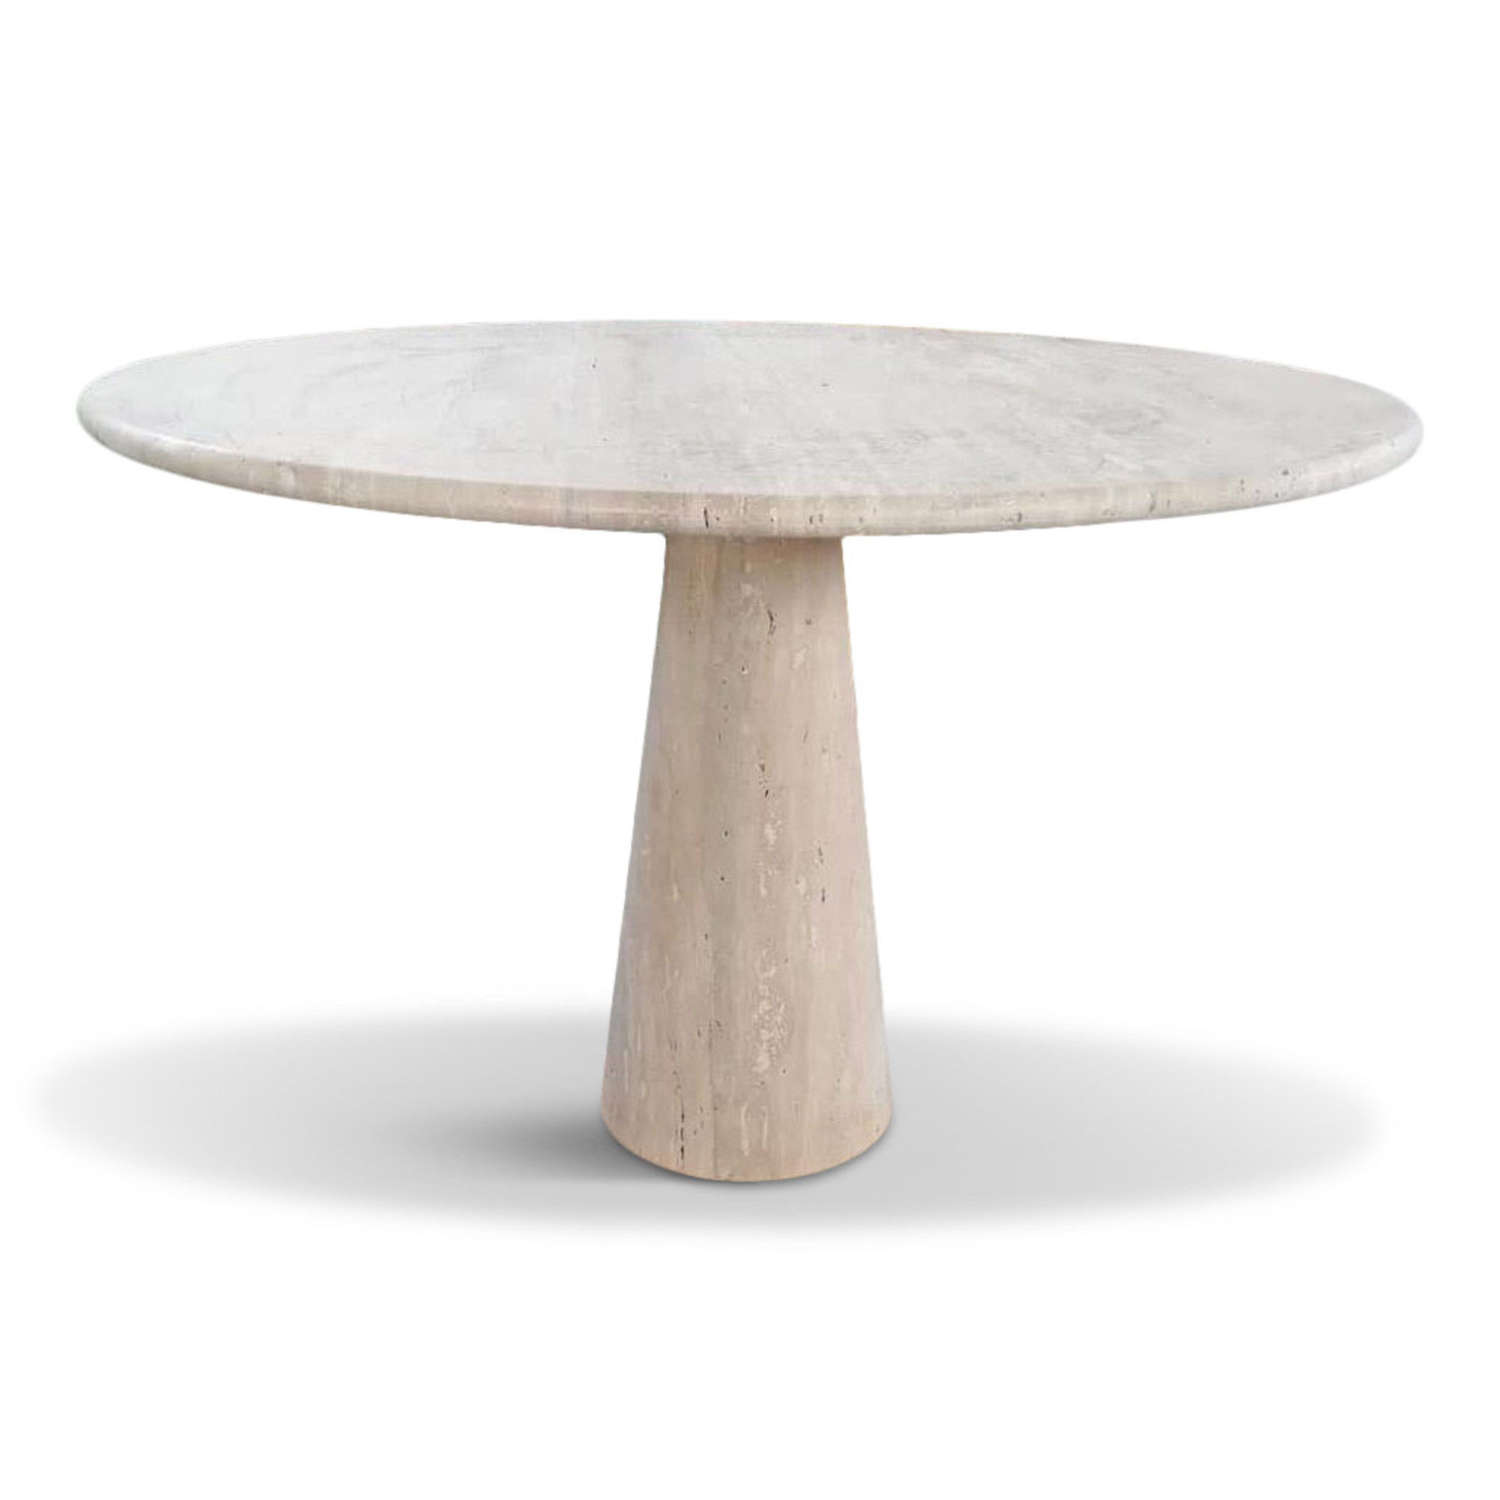 Made to order Italian travertine dining table